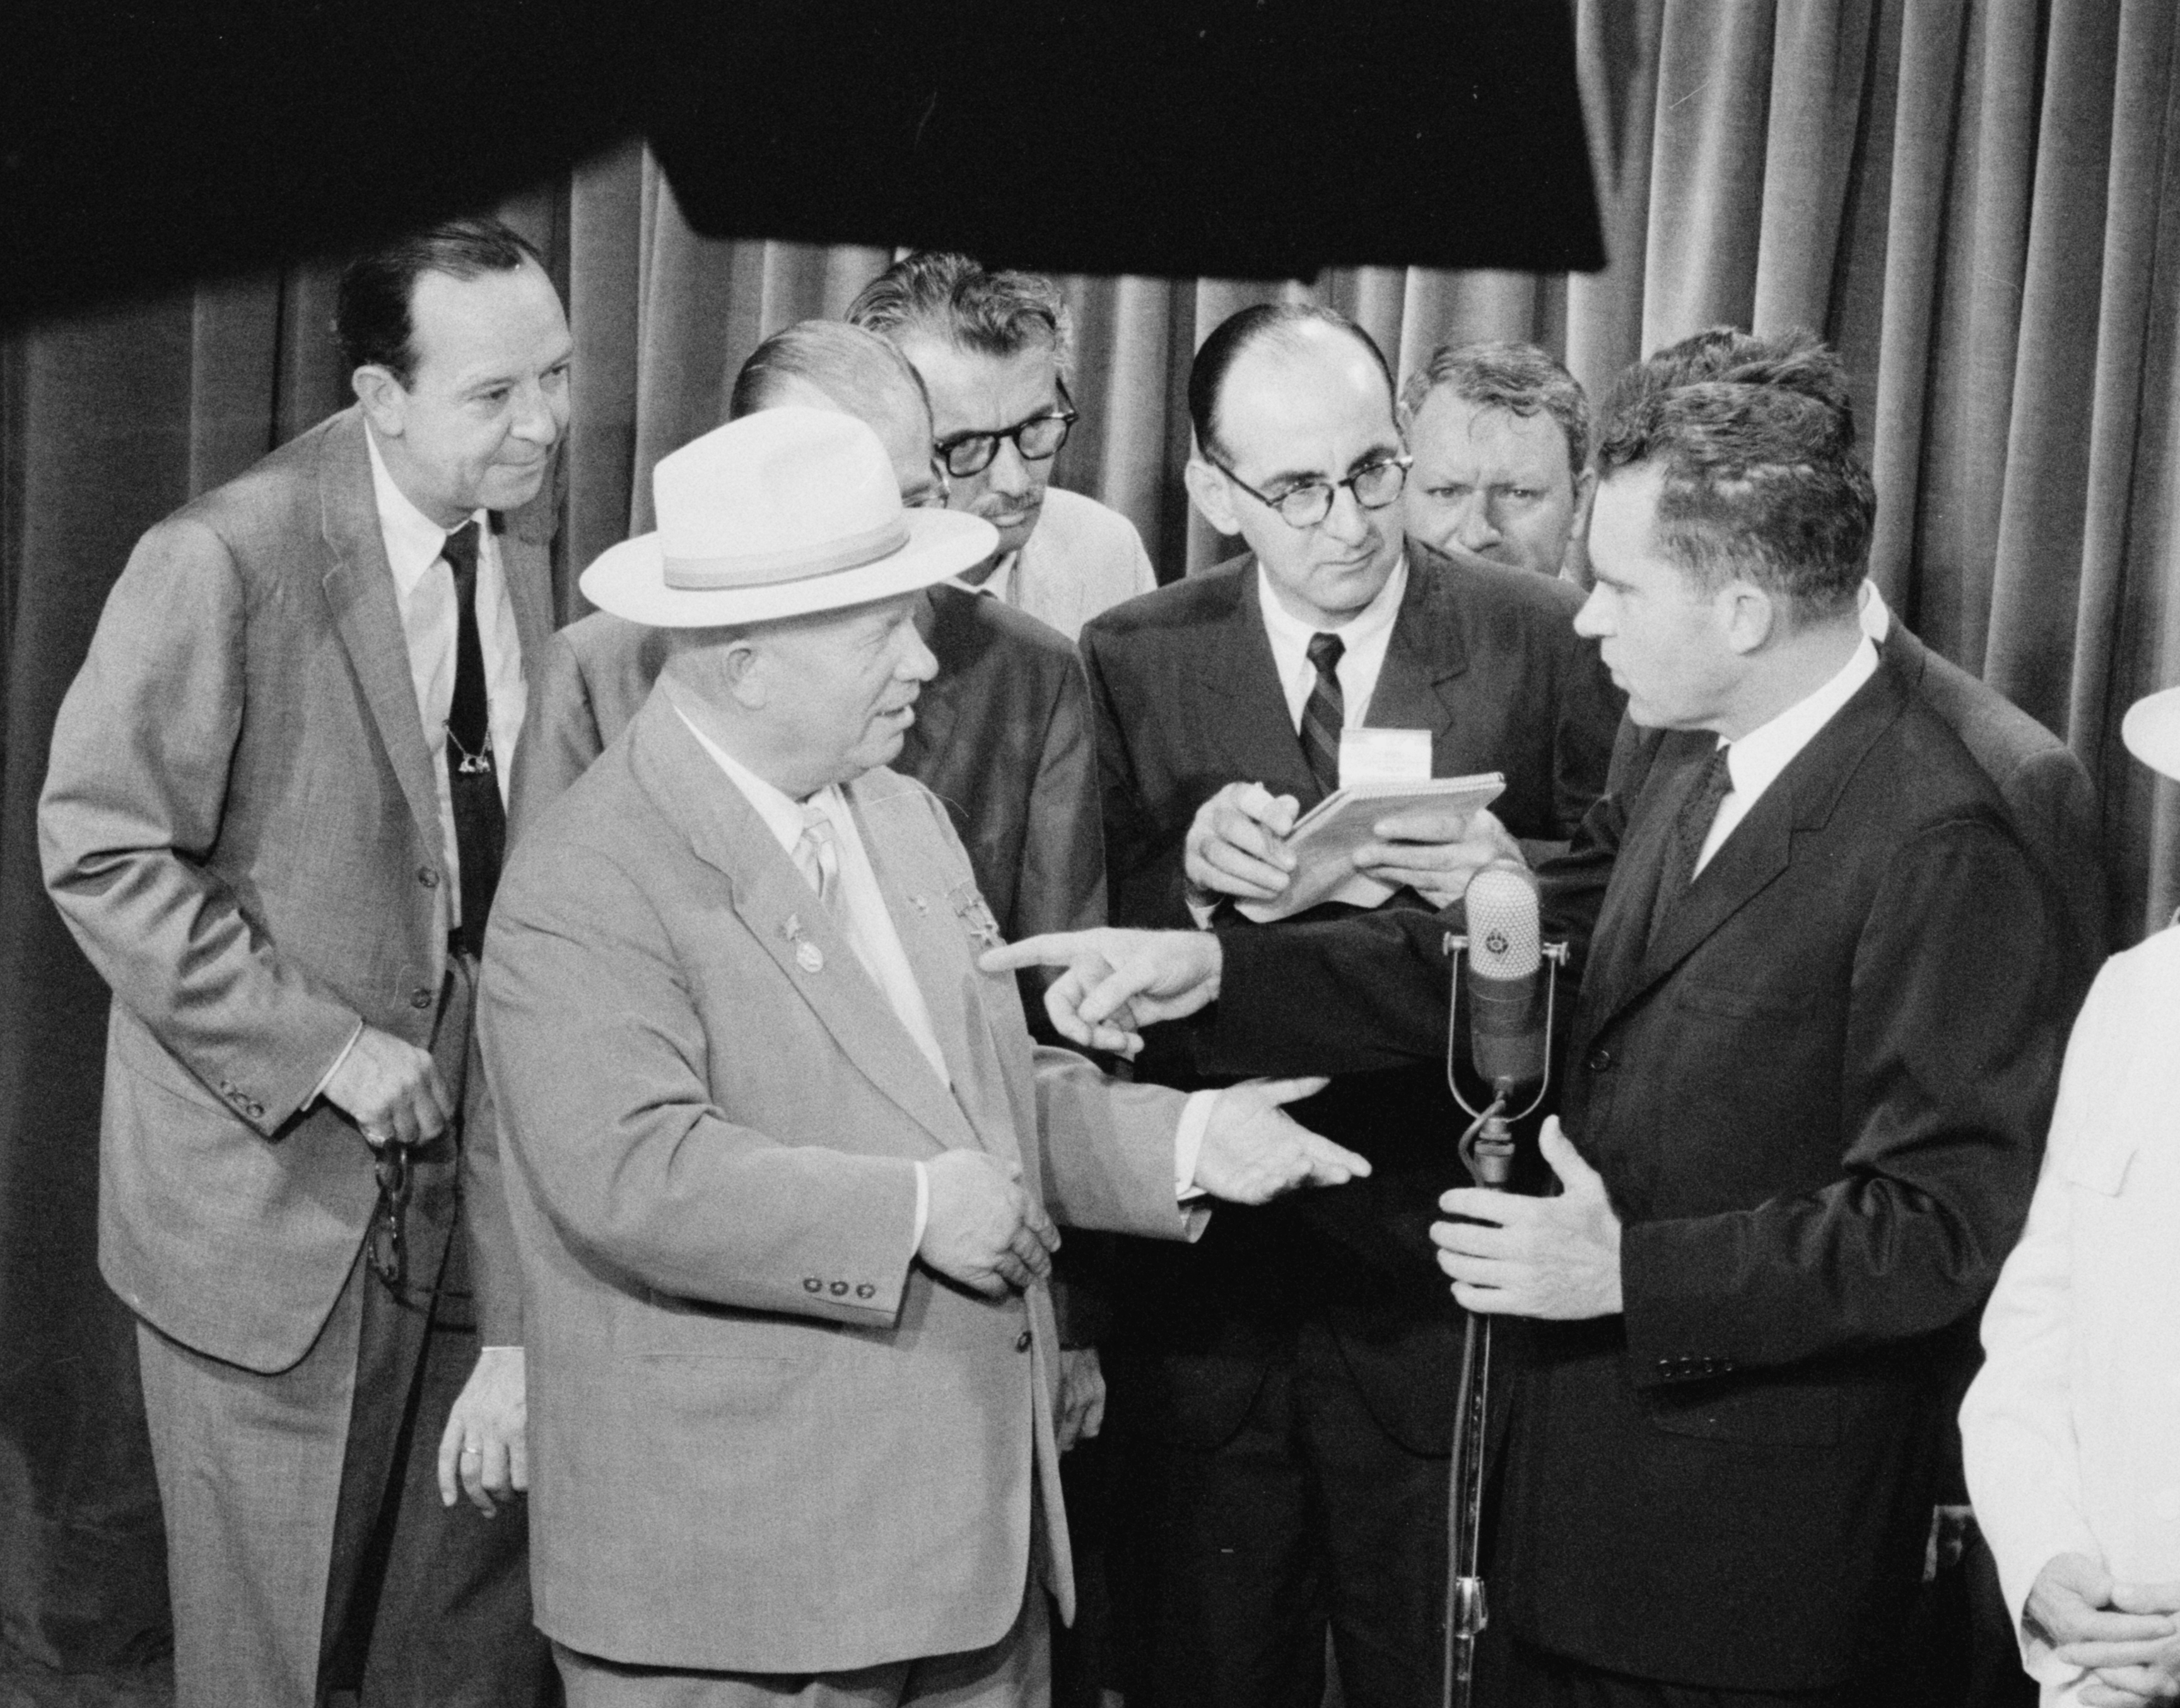 Khrushchev and Nixon trade insults during the Kitchen Debate on July 24, 1959. Credit to Library of Congress.